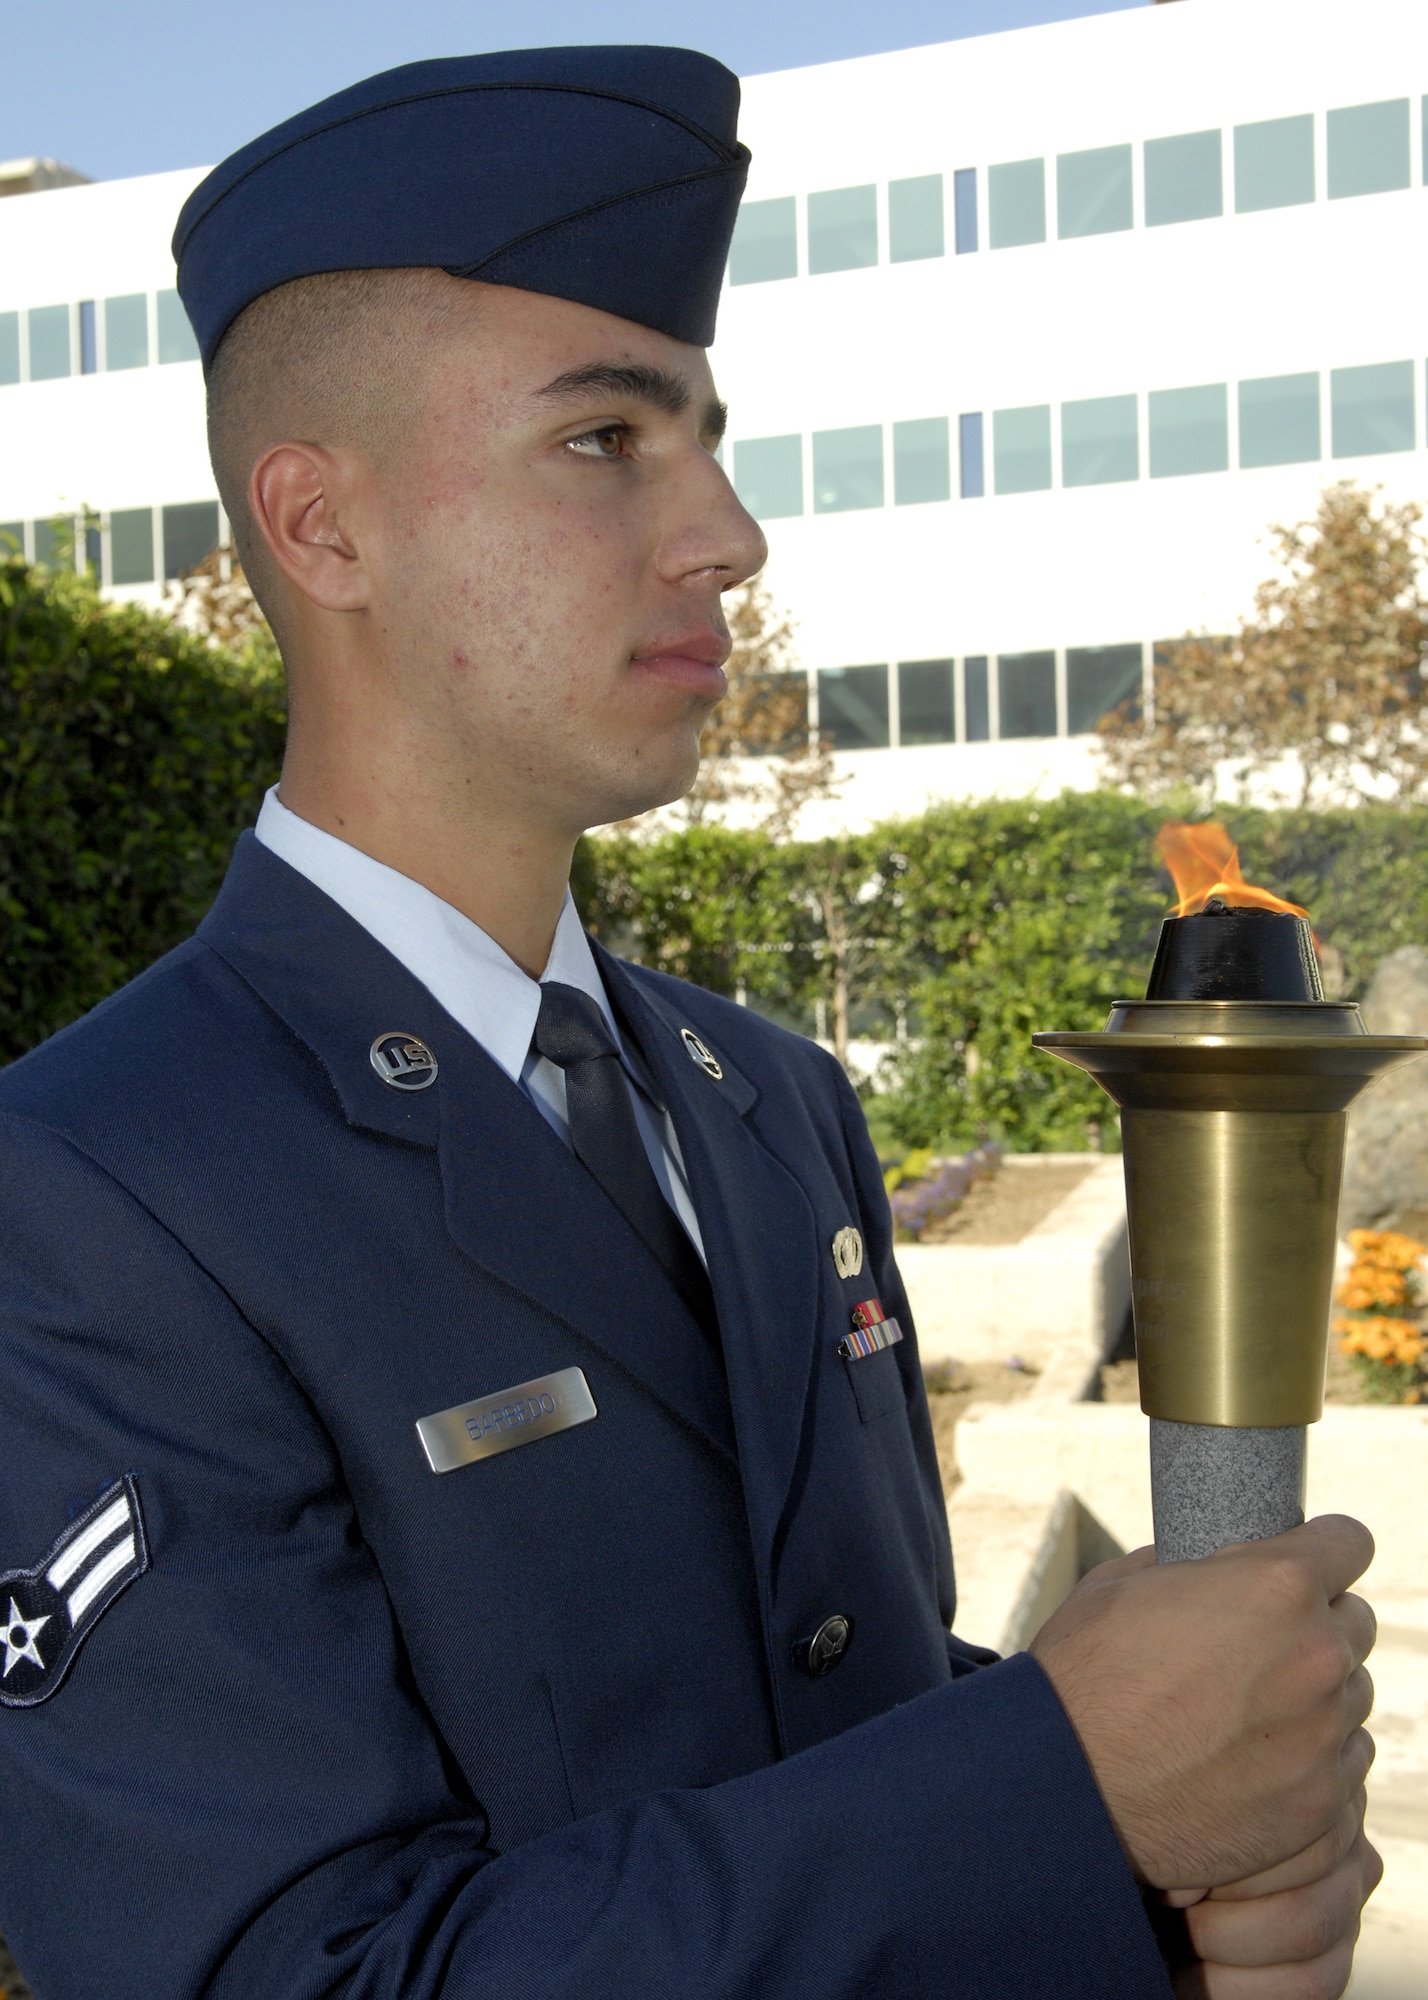 Airman 1st Class Turkha Barbedo, 61st Air Base Wing Financial Management, represented all the men and women of Space and Missile Systems Center as he holds the torch during the POW/MIA Wreath Laying Ceremony at the Schiever Space Complex courtyard, Sep. 19. The ceremony was preceded by a 24-hour torch relay commemorating the National POW/MIA Recognition Day, which more than 180 military, civilian, contractor, and family members from Los Angeles Air Force Base participated. (Photo by Stephen Schester)